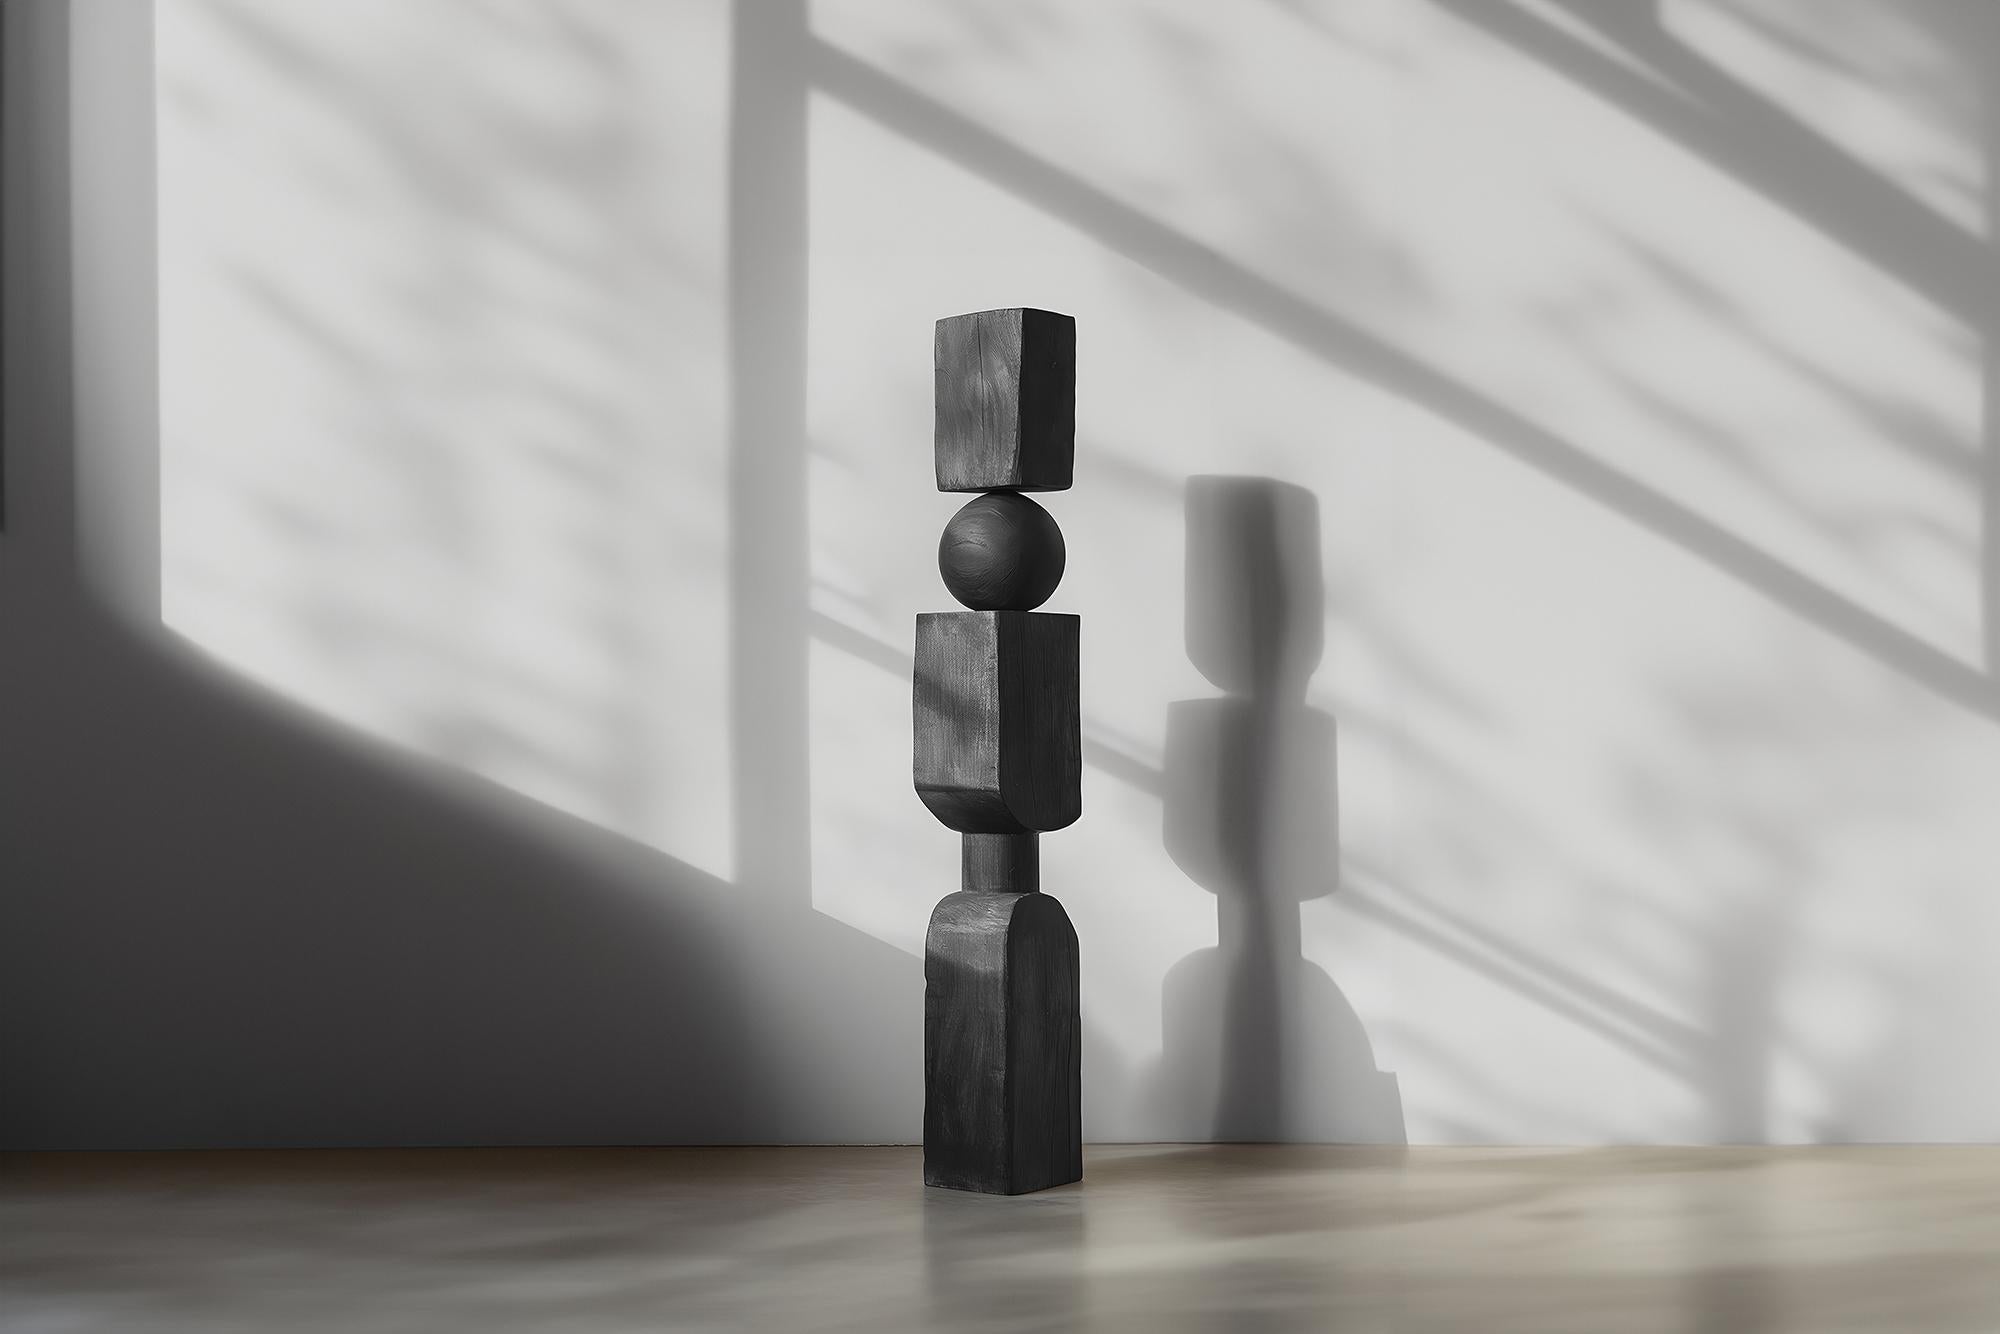 Modern Art Carved in Sleek Dark Black Solid Wood, NONO's Still Stand No99

——

Joel Escalona's wooden standing sculptures are objects of raw beauty and serene grace. Each one is a testament to the power of the material, with smooth curves that flow